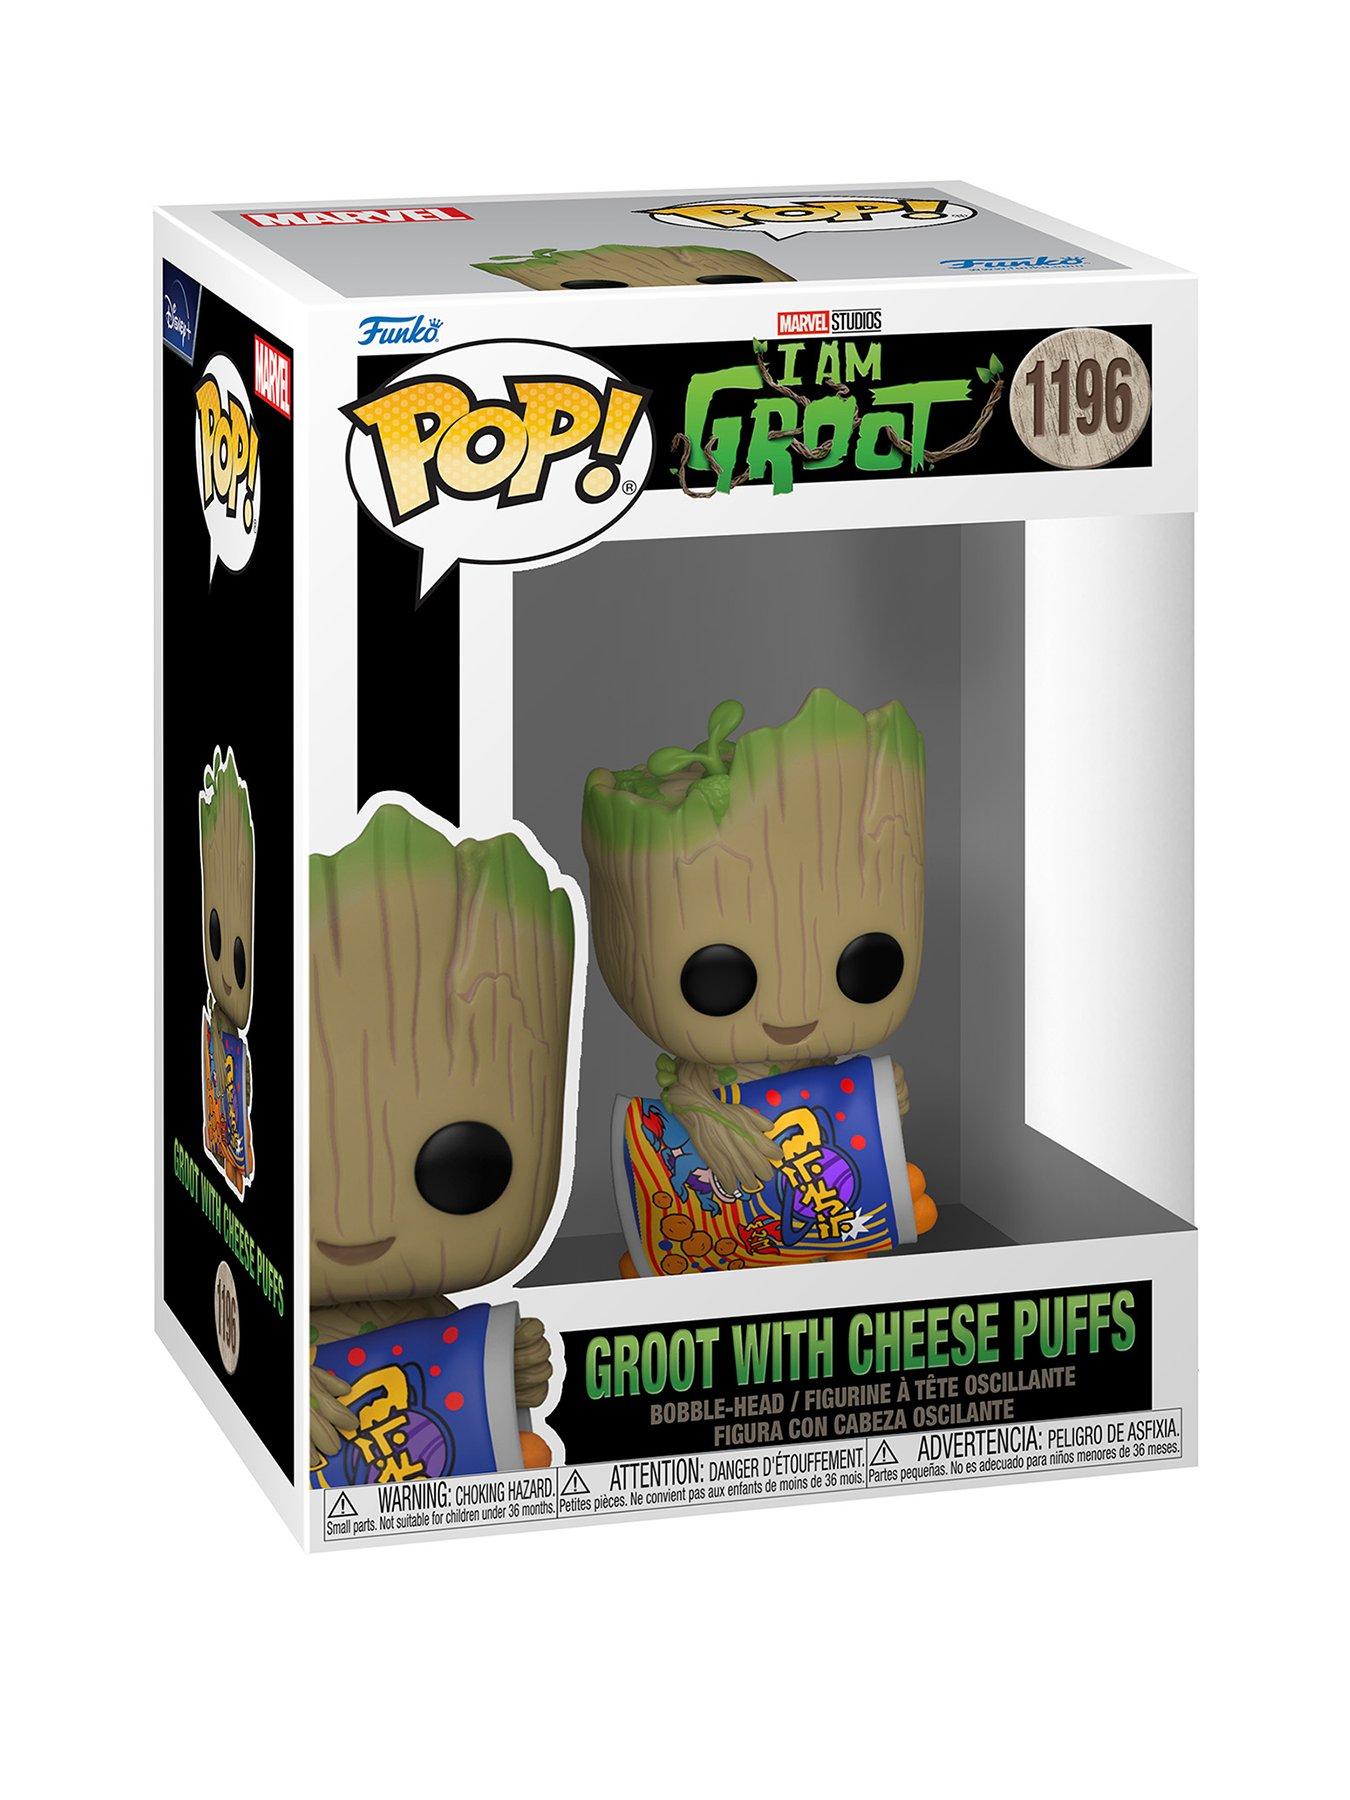 Groot Garage Little Smoby